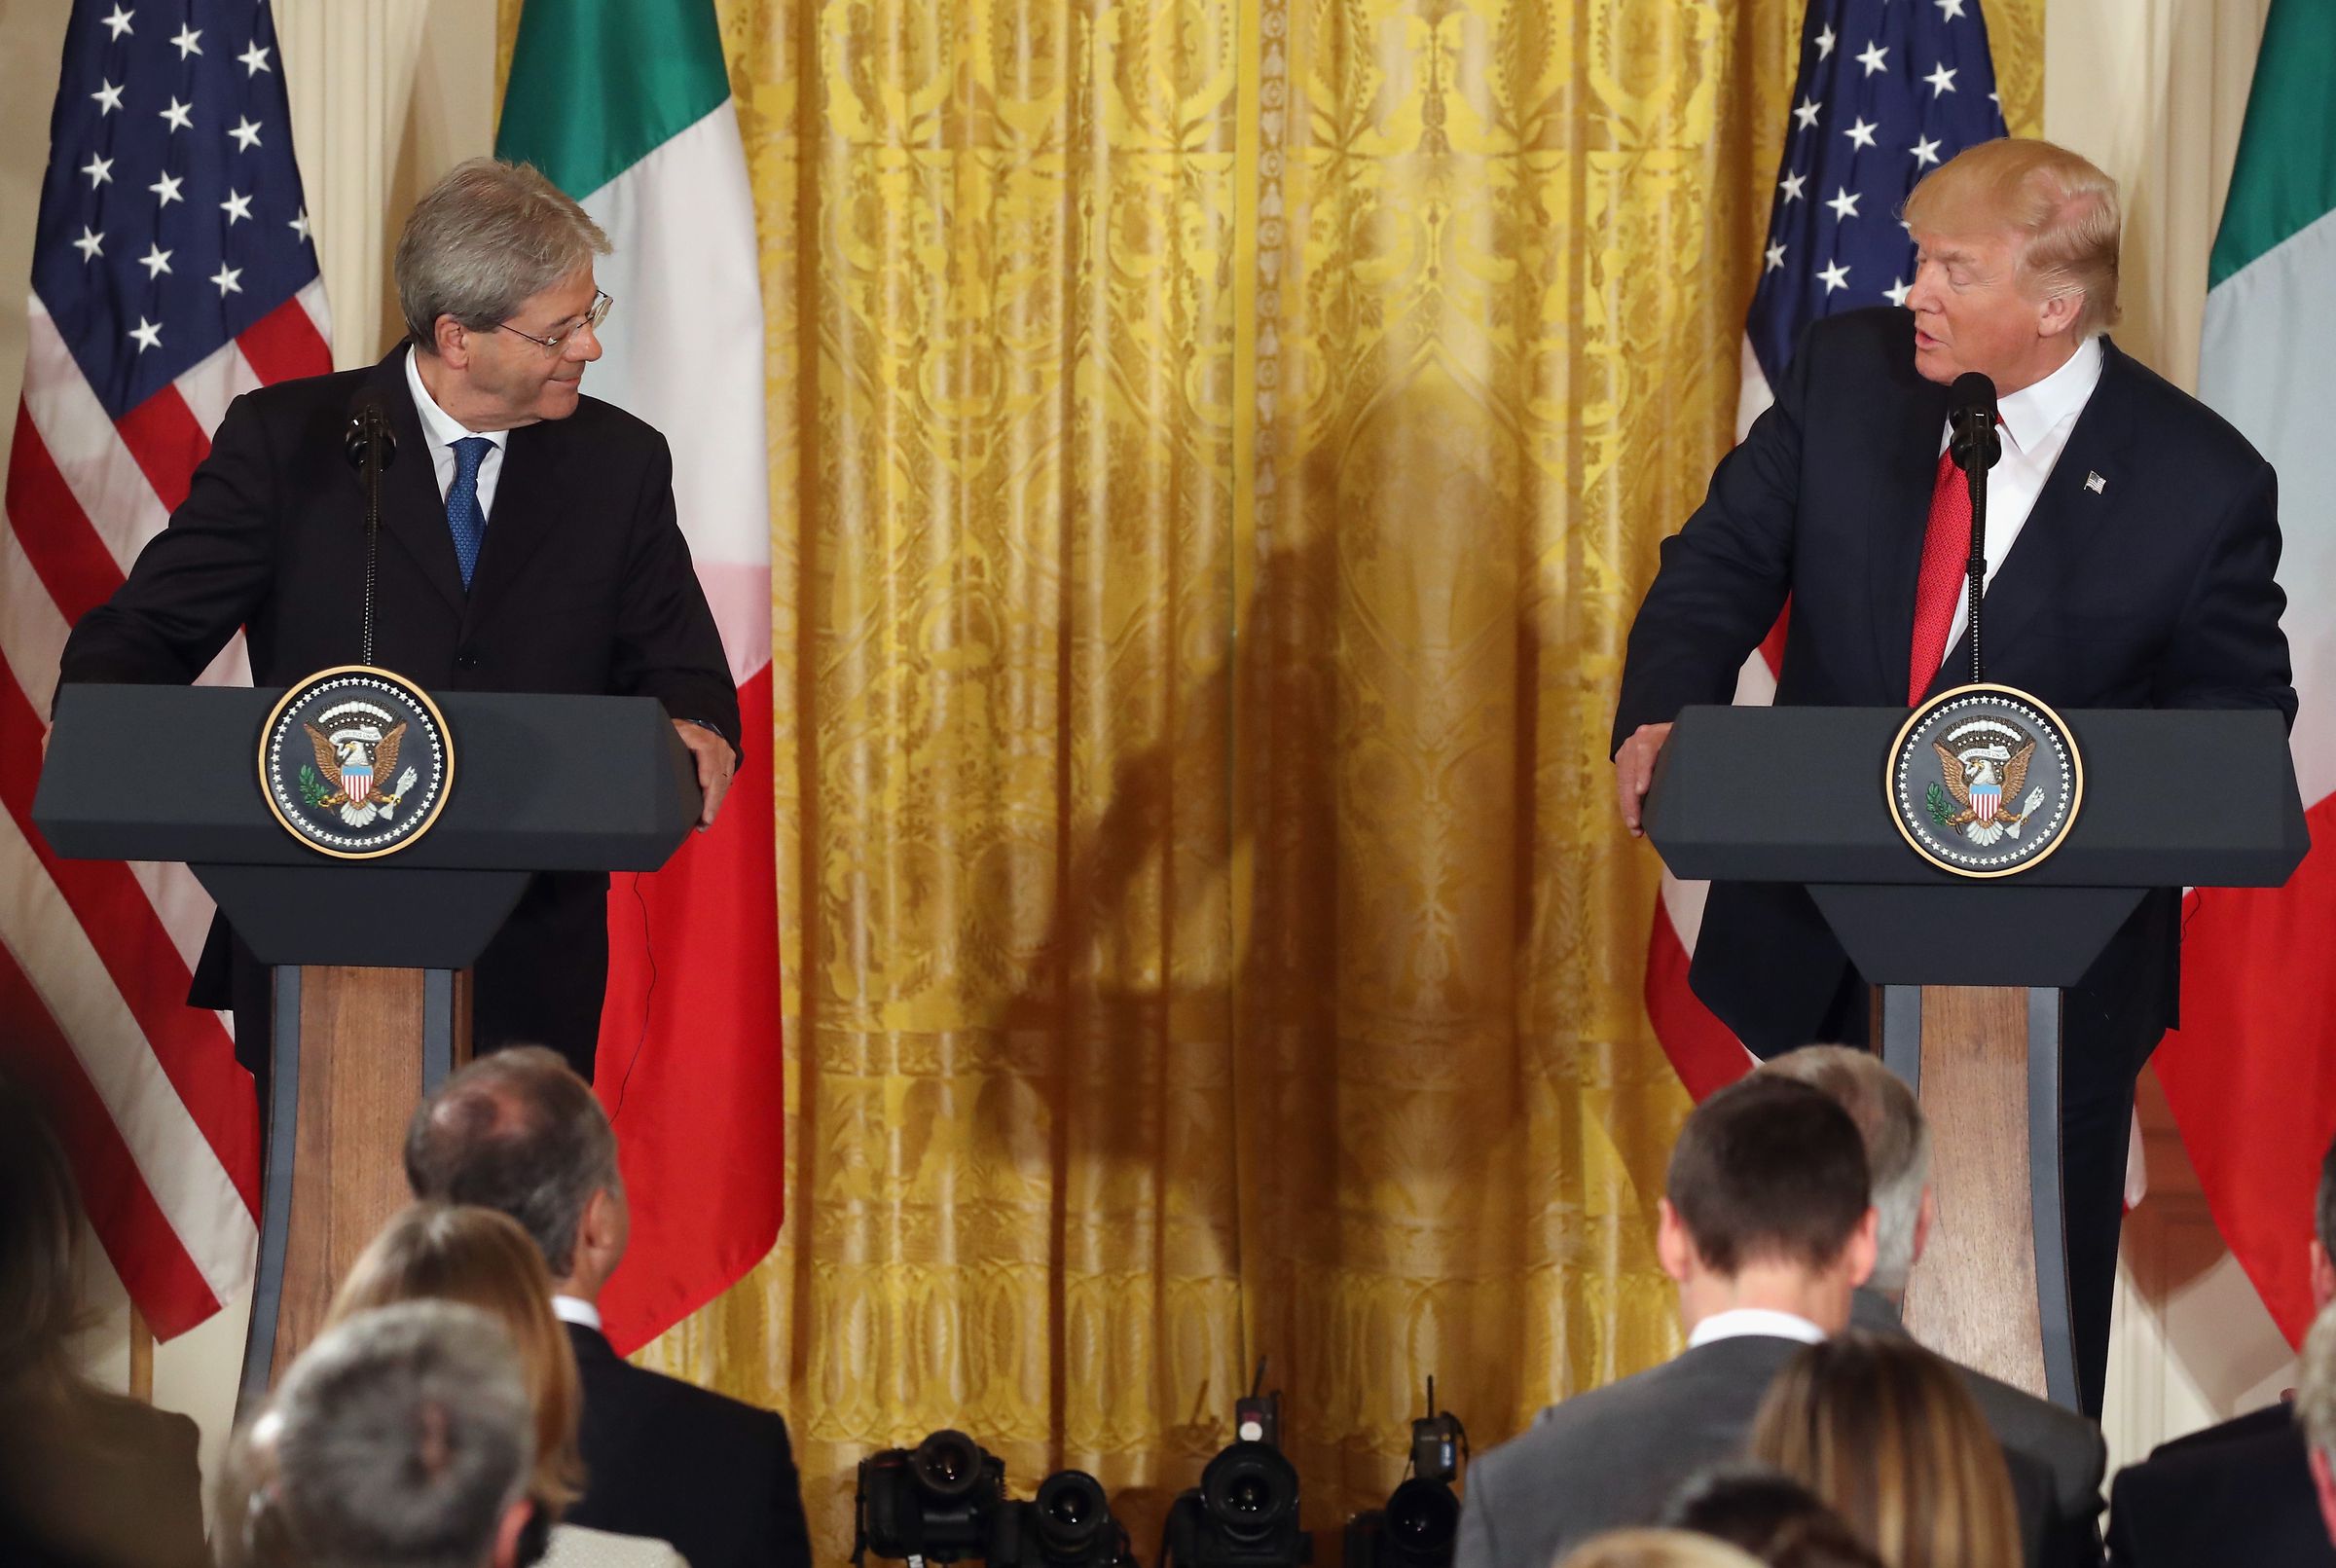 Donald Trump Meets With Italian PM Paolo Gentiloni At The White House